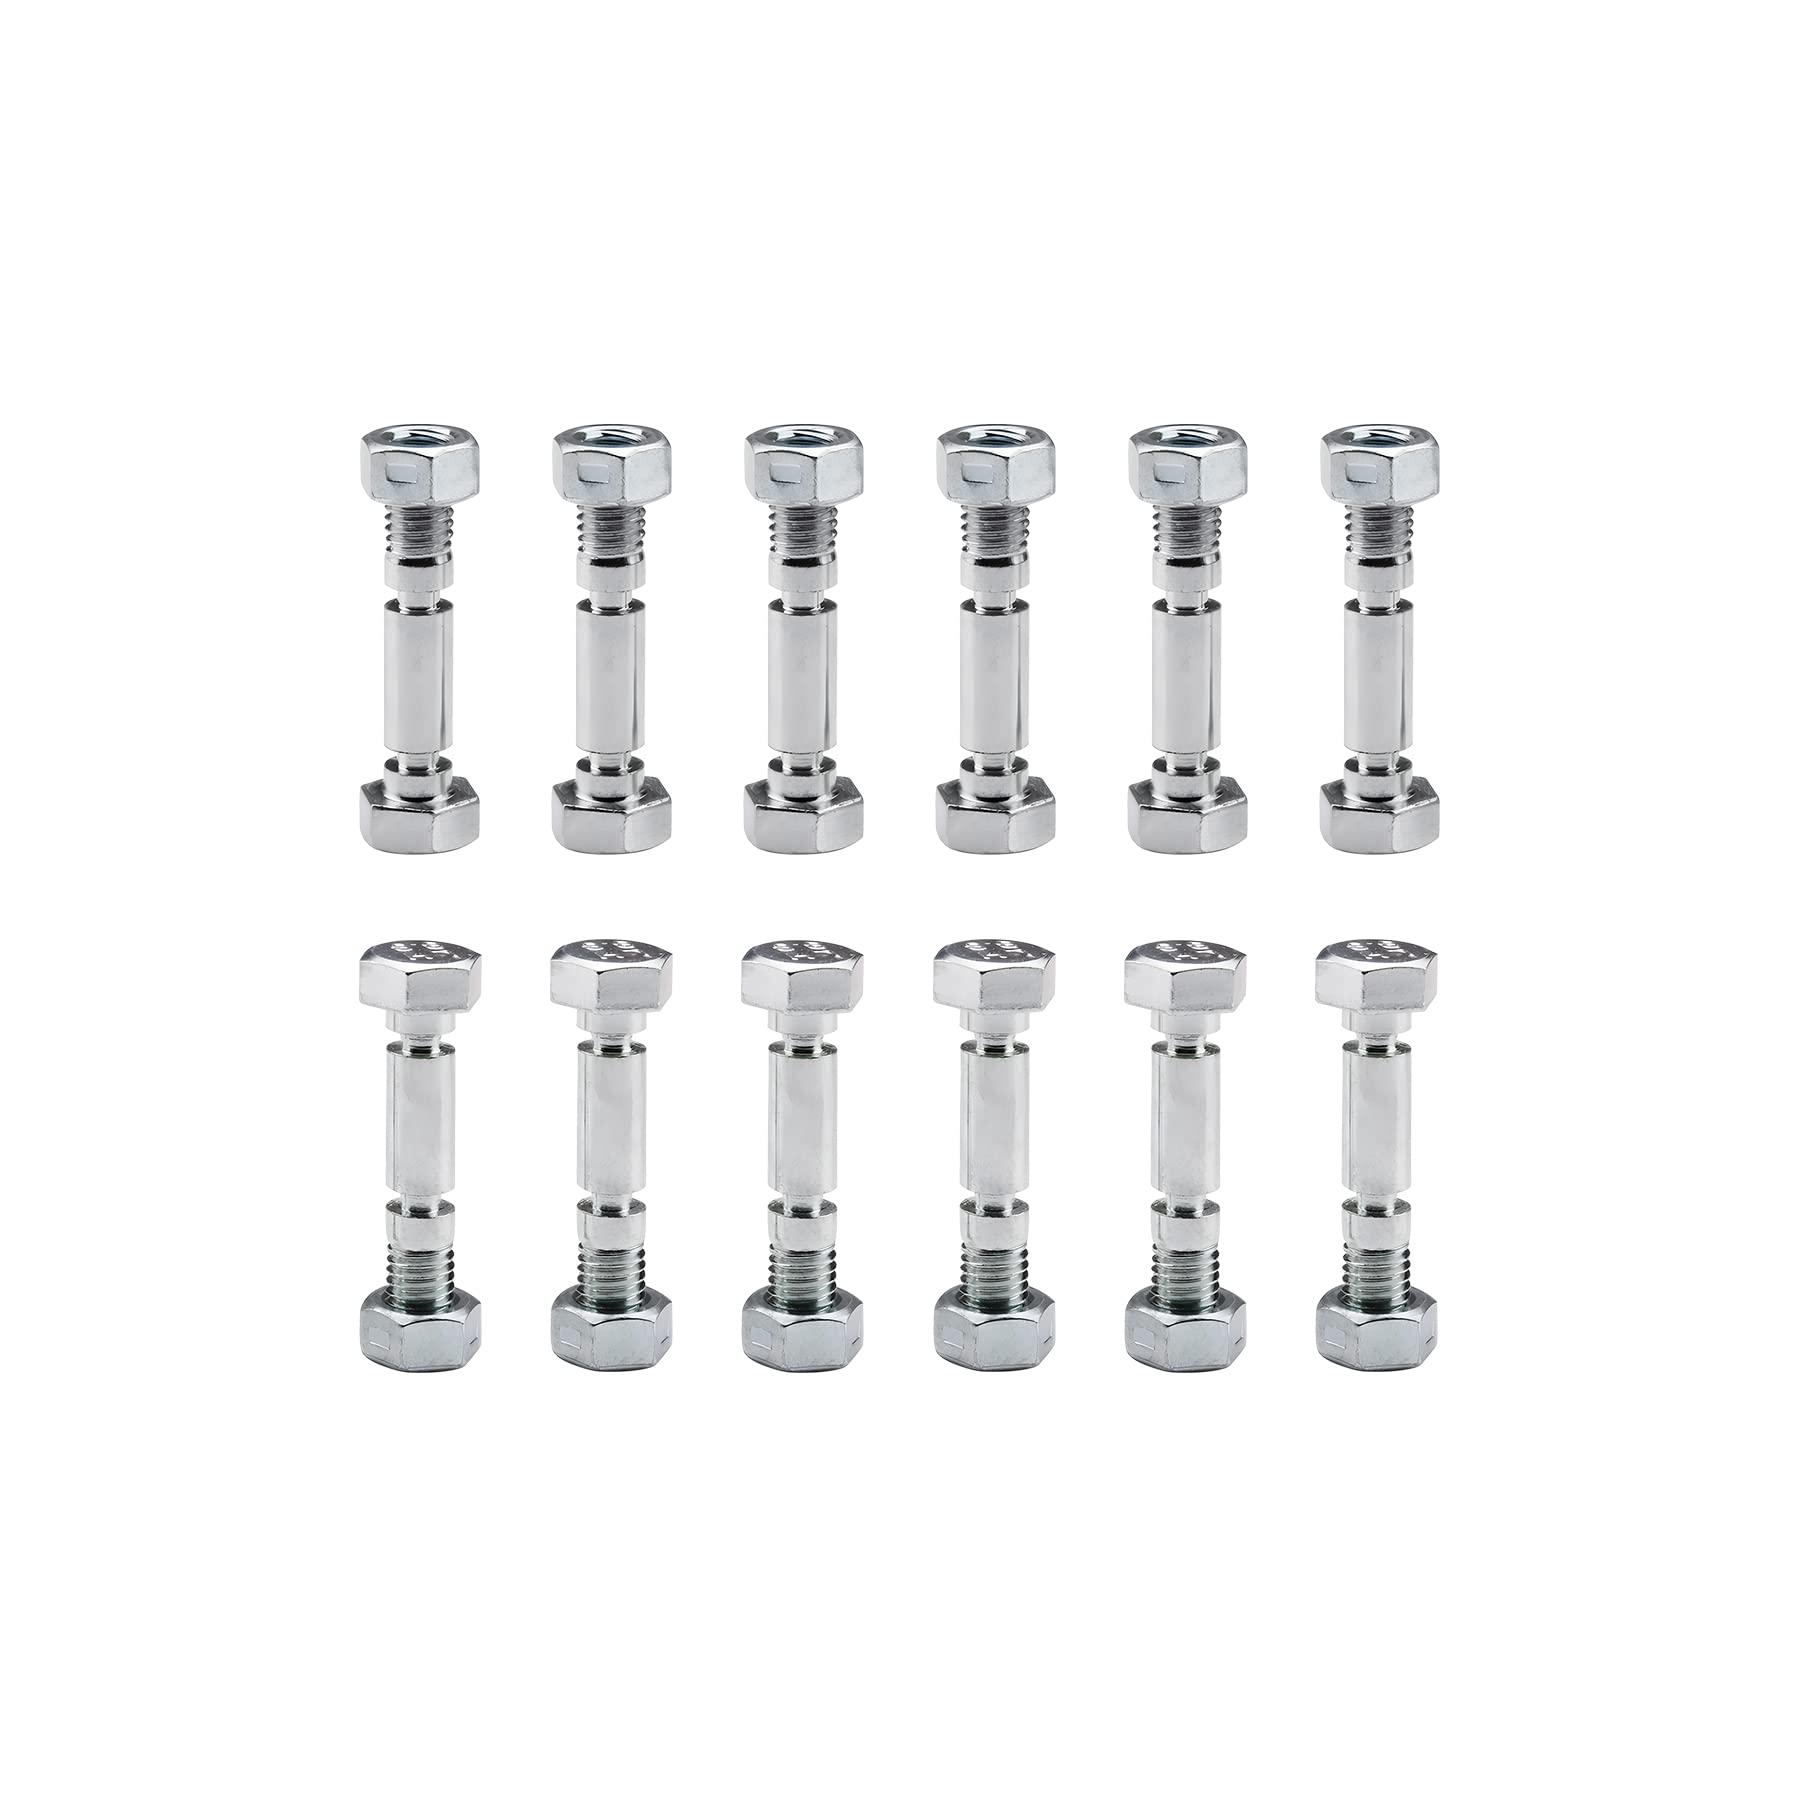 HYYLU (12 Packs) 710-0890 Shear Pins with Nuts for MTD Cub Cadet Troy-Bilt and More Snow Blower - 12 Pcs 710-0890A and 910-0890A Snow Throwers fits Parts (1-1/2" x 5/16")